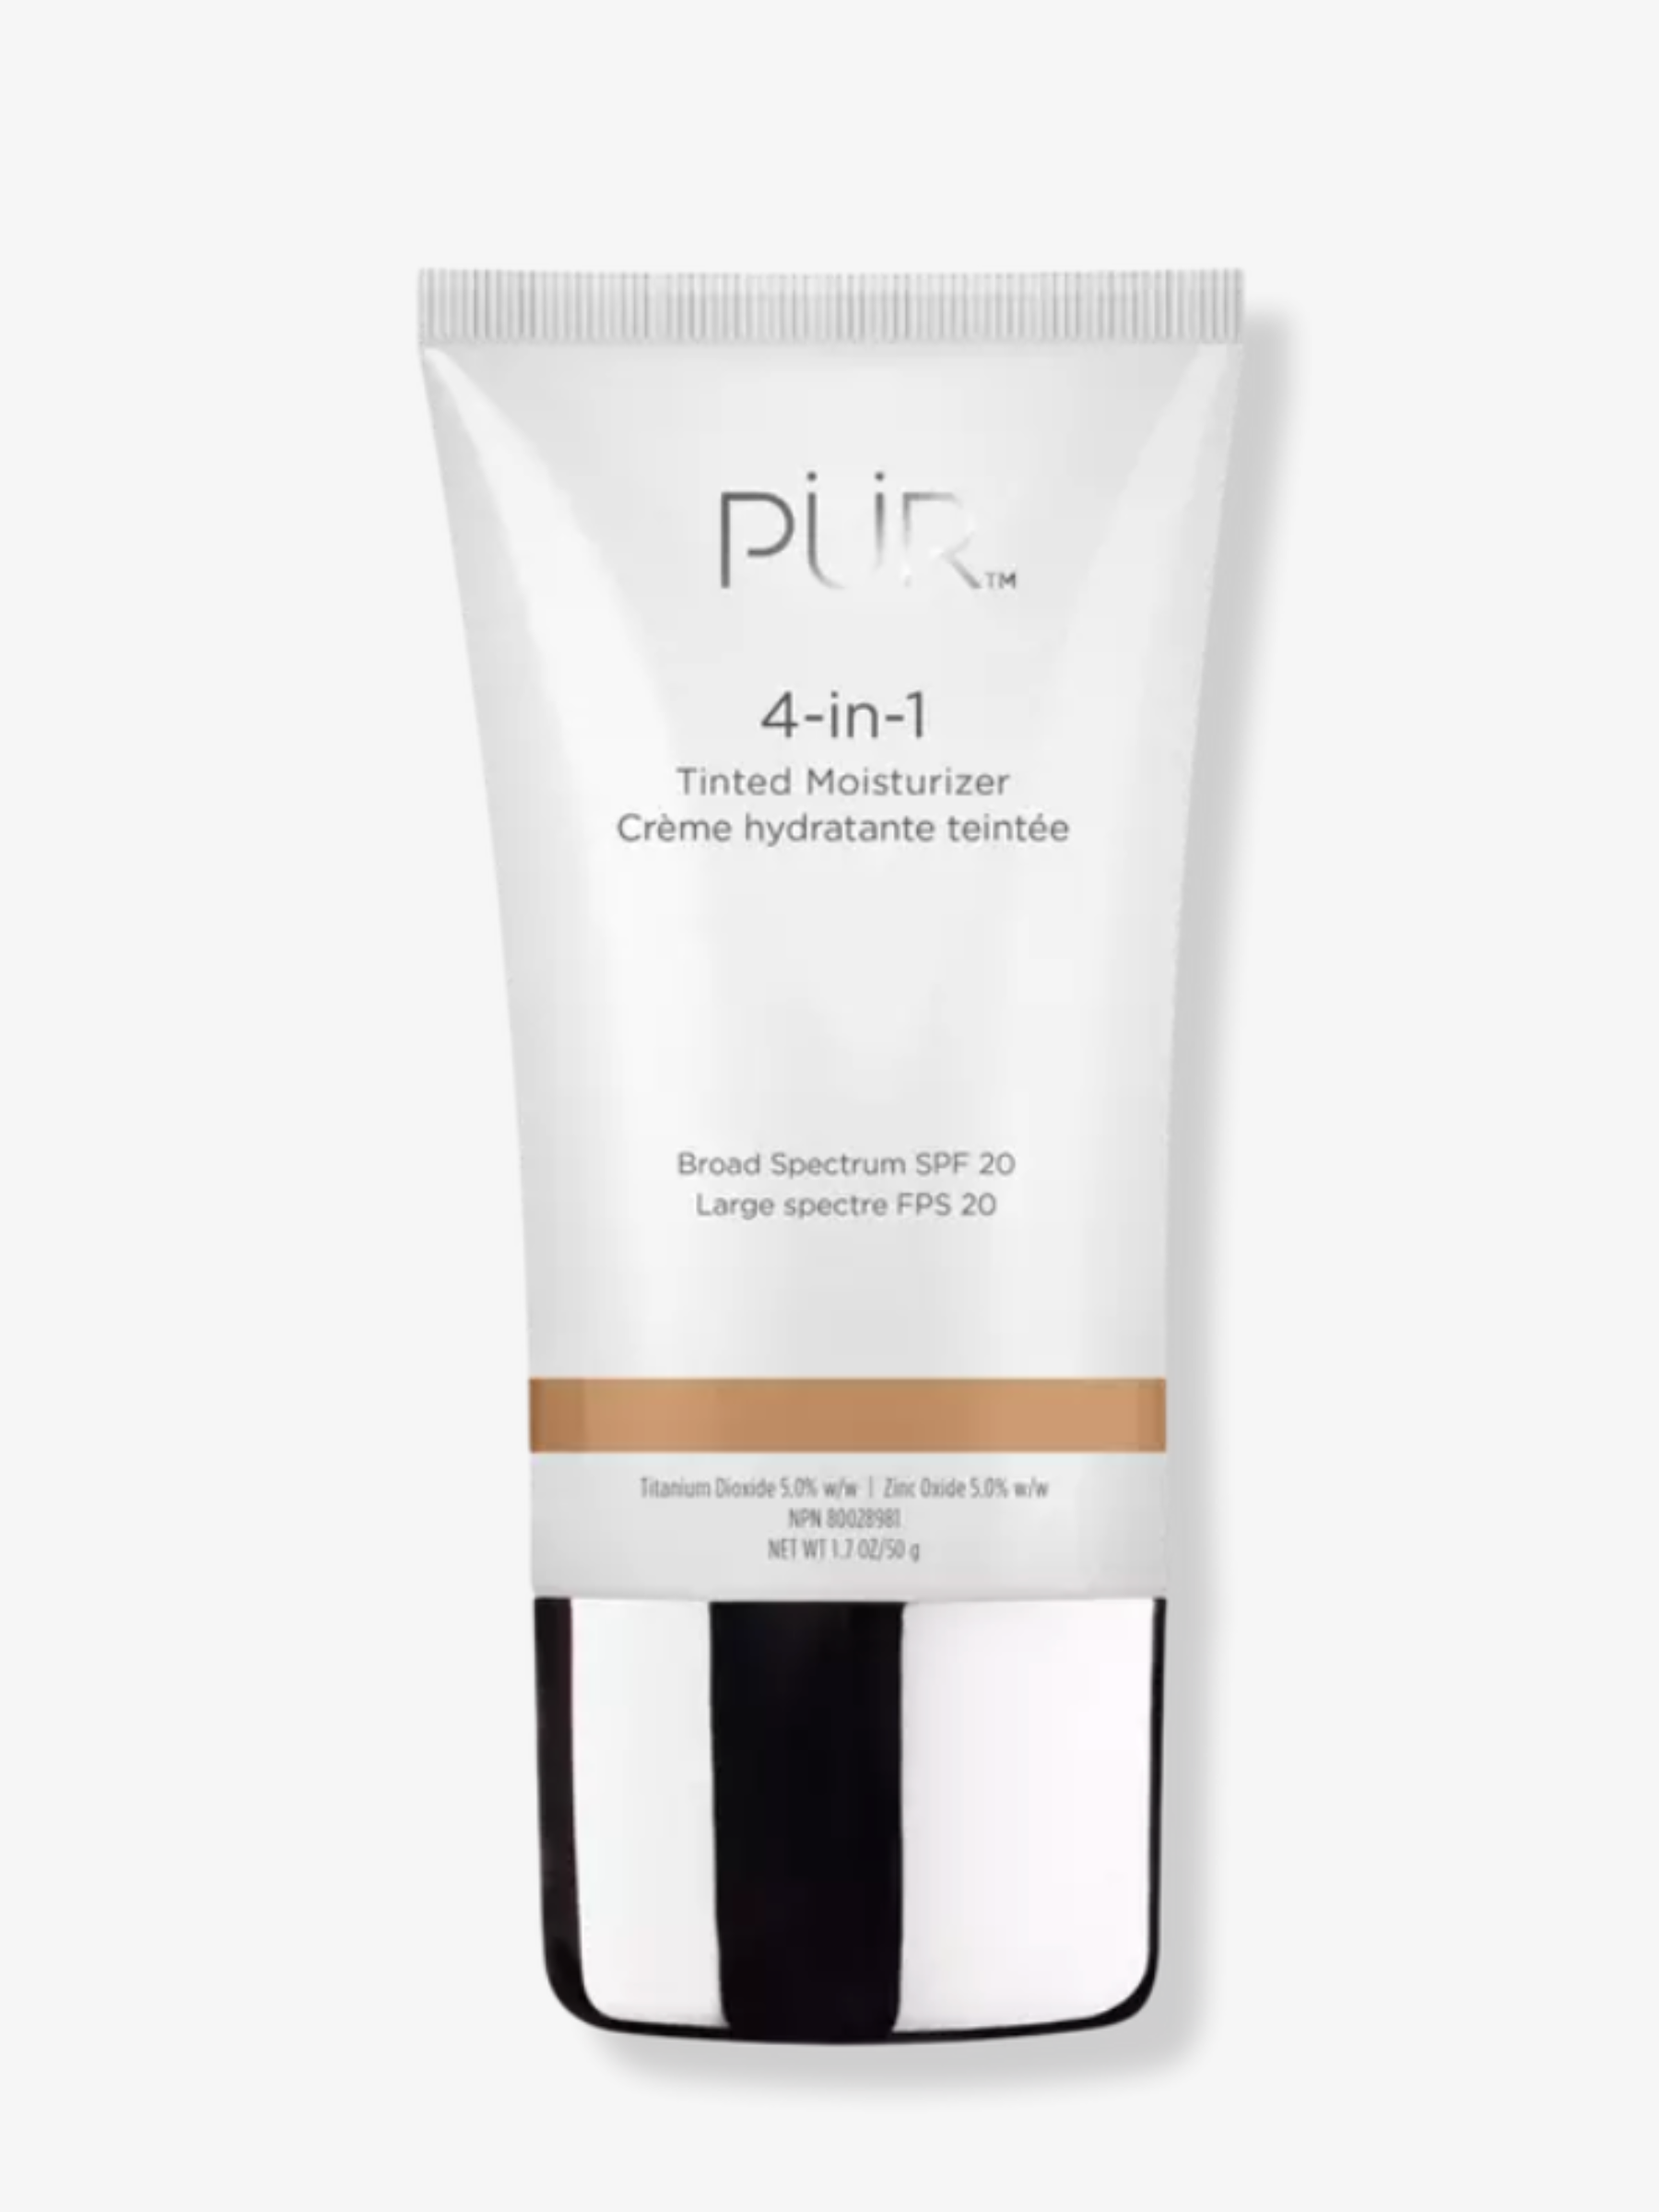 <p>Packed with skin-loving ingredients like vitamin E to nourish the skin, chamomile to soothe irritation, and sodium hyaluronate to deeply hydrate, this PÜR CC cream is a true multi-use product—acting as a moisturizer, primer, foundation, and SPF all in one. With buildable sheer coverage and a weightless, second-skin feel, the CC cream is a favorite among makeup experts like Greenberg who likes that it leaves skin plump and dewy. The dermatologist-approved formula delivers a lit-from-within glow every time, no matter the climate or state of your skin.</p> <p><strong>Size:</strong> 1.7 ounces / <strong>Shades:</strong> 16 / <strong>Key Ingredients:</strong> Vitamin E, chamomile, sodium hyaluronate, shea butter, aloe / <strong>Finish:</strong> Luminous / <strong>SPF:</strong> 20</p> <ul> <li><strong>Pros</strong>: Deeply hydrating, second-skin feel</li> <li><strong>Cons</strong>: Not ideal for oily skin</li> </ul> $33, Amazon. <a href="https://www.amazon.com/Tinted-Moisturizer-Broad-Spectrum-Medium/dp/B007CKT0FW">Get it now!</a><p>Sign up for today’s biggest stories, from pop culture to politics.</p><a href="https://www.glamour.com/newsletter/news?sourceCode=msnsend">Sign Up</a>